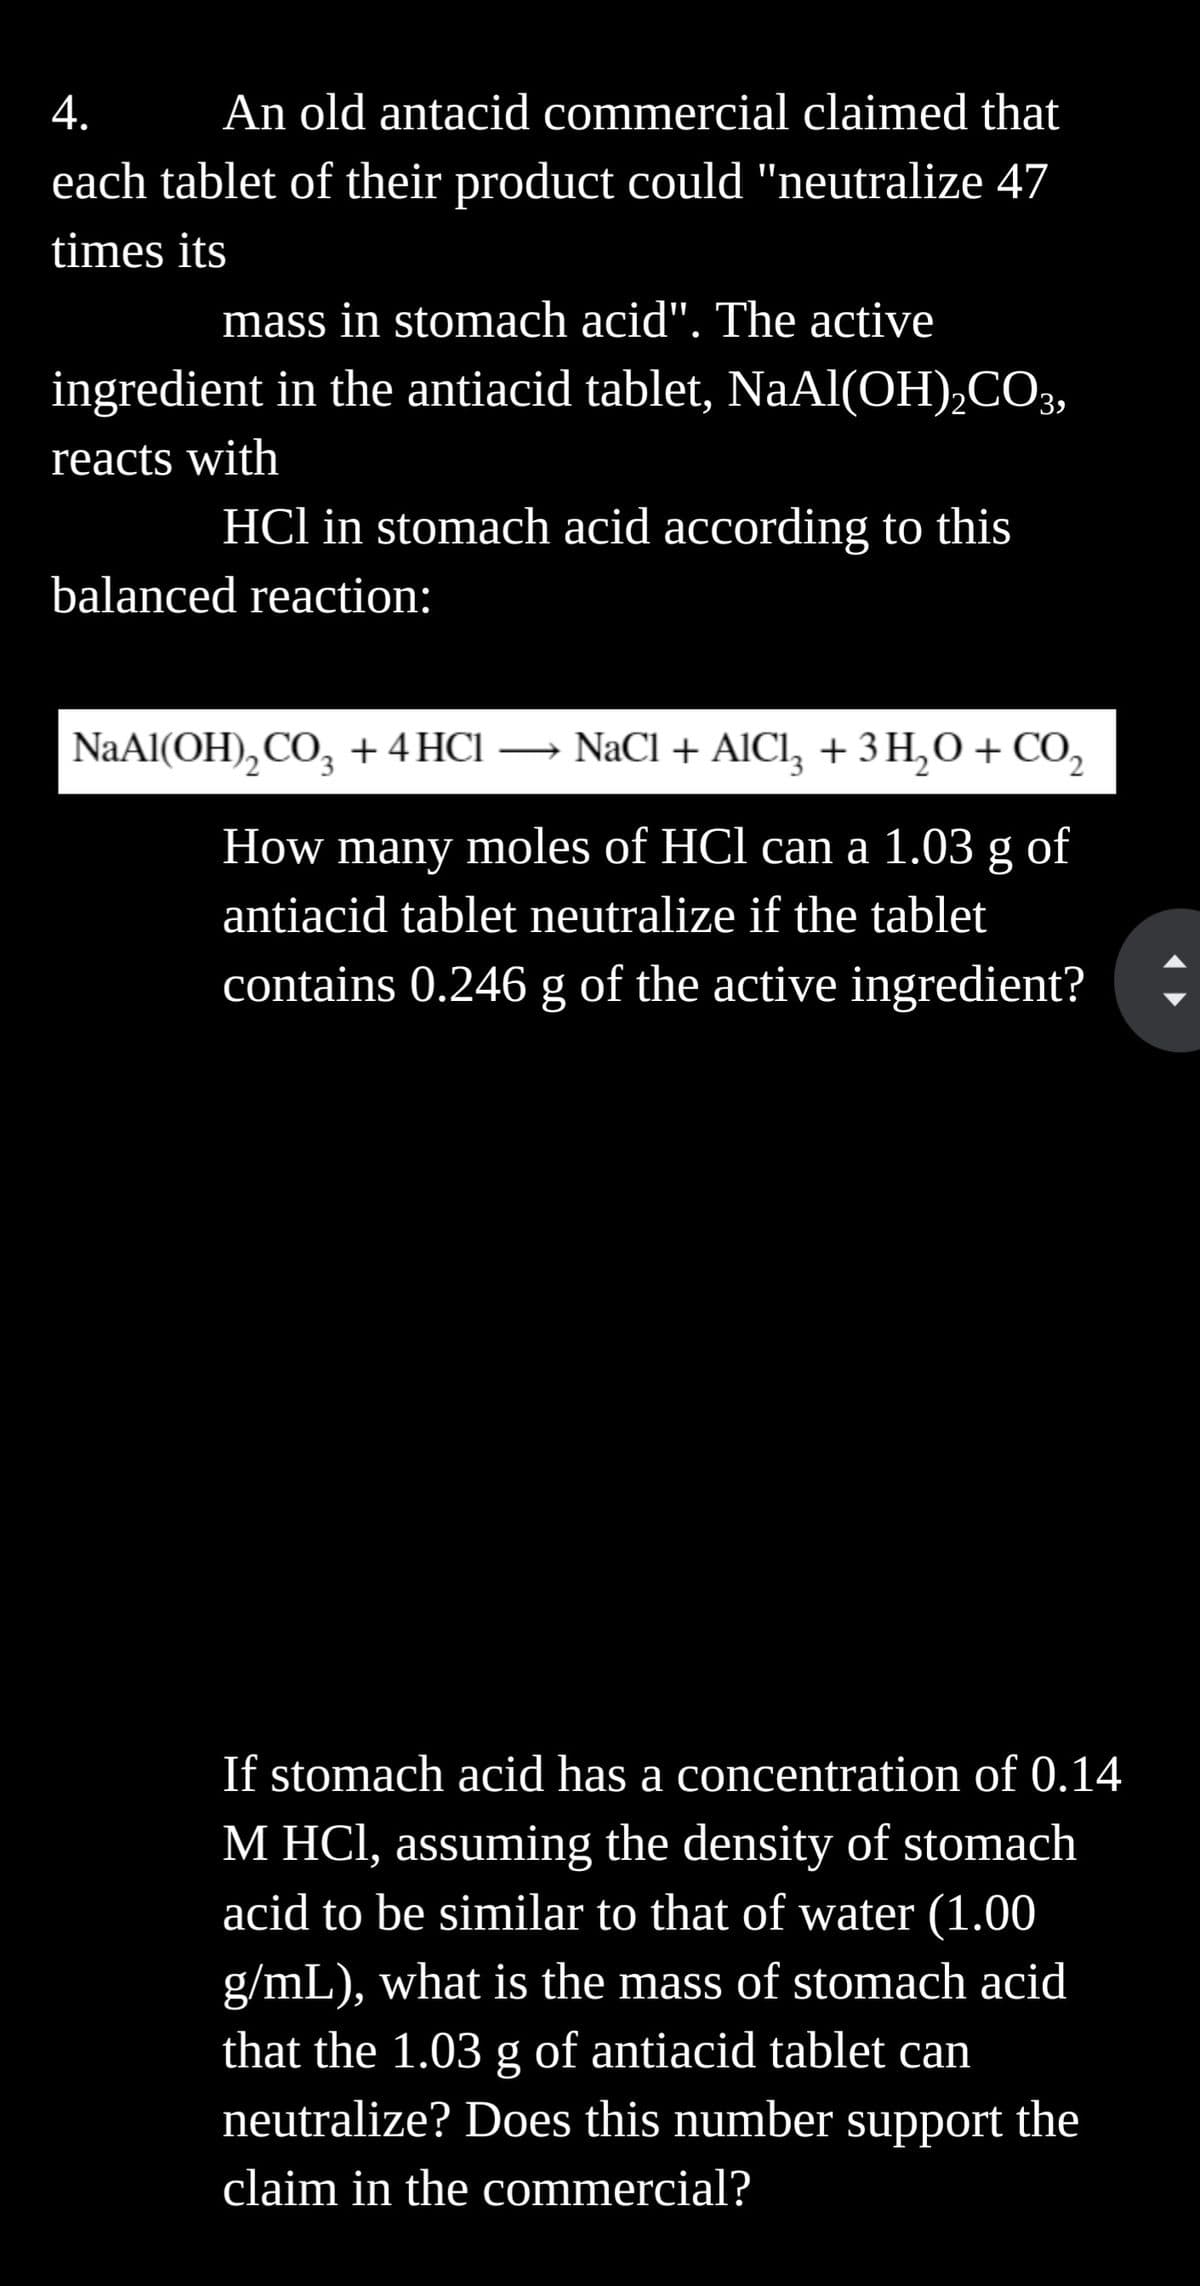 4.
An old antacid commercial claimed that
each tablet of their product could "neutralize 47
times its
mass in stomach acid". The active
ingredient in the antiacid tablet, NaAl(OH)₂CO3,
reacts with
HCl in stomach acid according to this
balanced reaction:
NaAl(OH)₂CO3 + 4 HCl →→ NaCl + AlCl³ + 3 H₂O + CO₂
How many moles of HCl can a 1.03 g of
antiacid tablet neutralize if the tablet
contains 0.246 g of the active ingredient?
If stomach acid has a concentration of 0.14
M HCl, assuming the density of stomach
acid to be similar to that of water (1.00
g/mL), what is the mass of stomach acid
that the 1.03 g of antiacid tablet can
neutralize? Does this number support the
claim in the commercial?